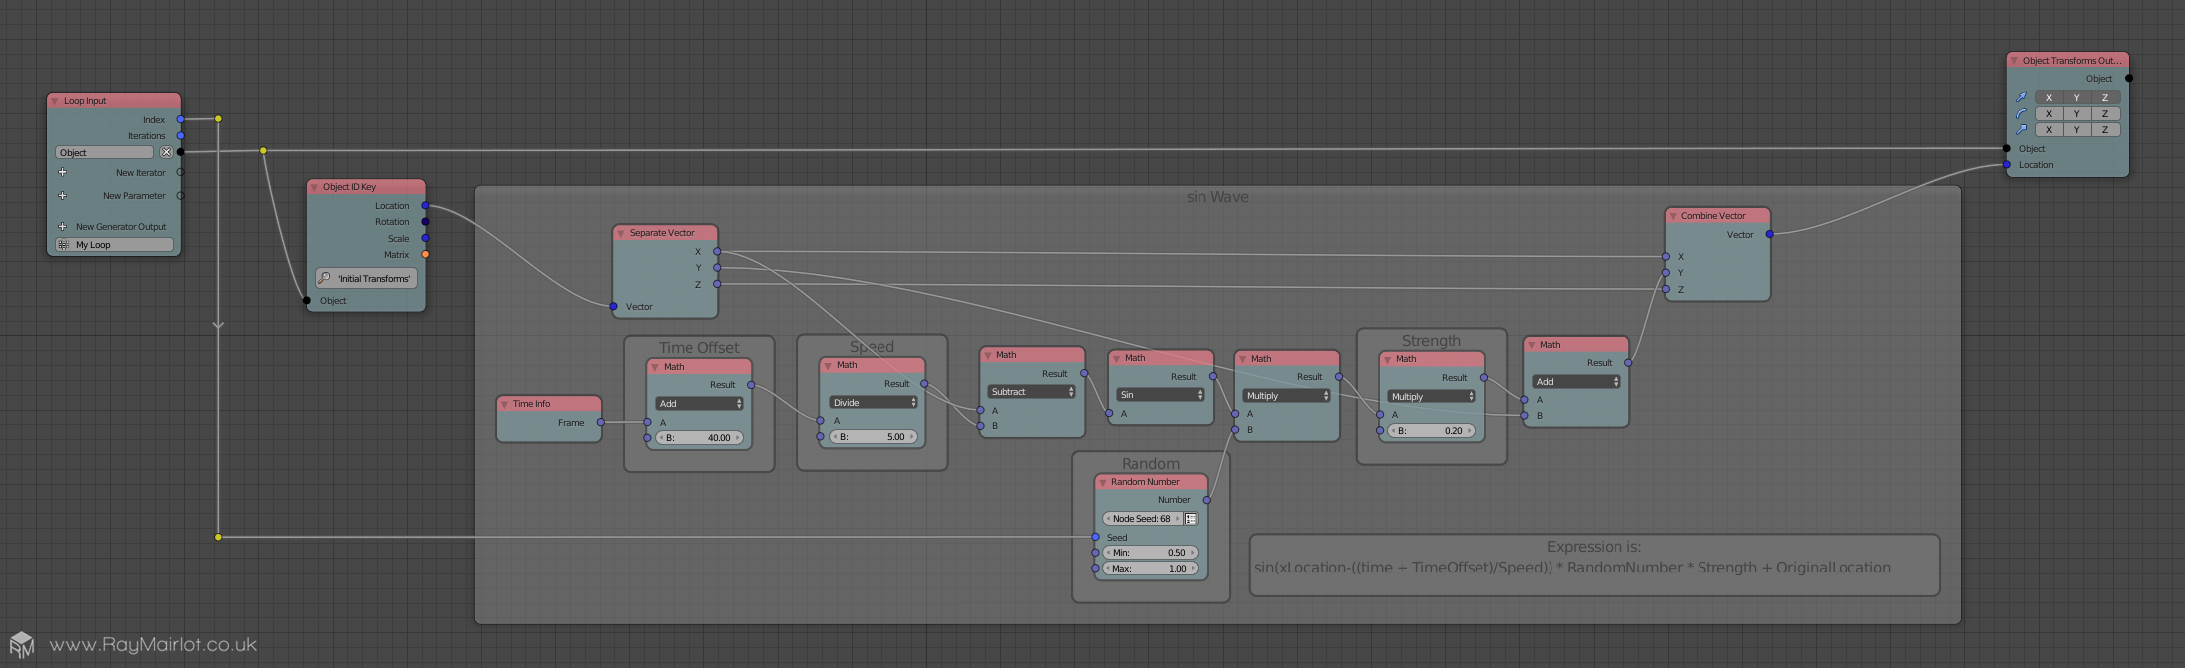 A screenshot from within Blender 3D showing an 'Animation Nodes' node graph. The nodes are in a frame labelled 'sin Wave'.